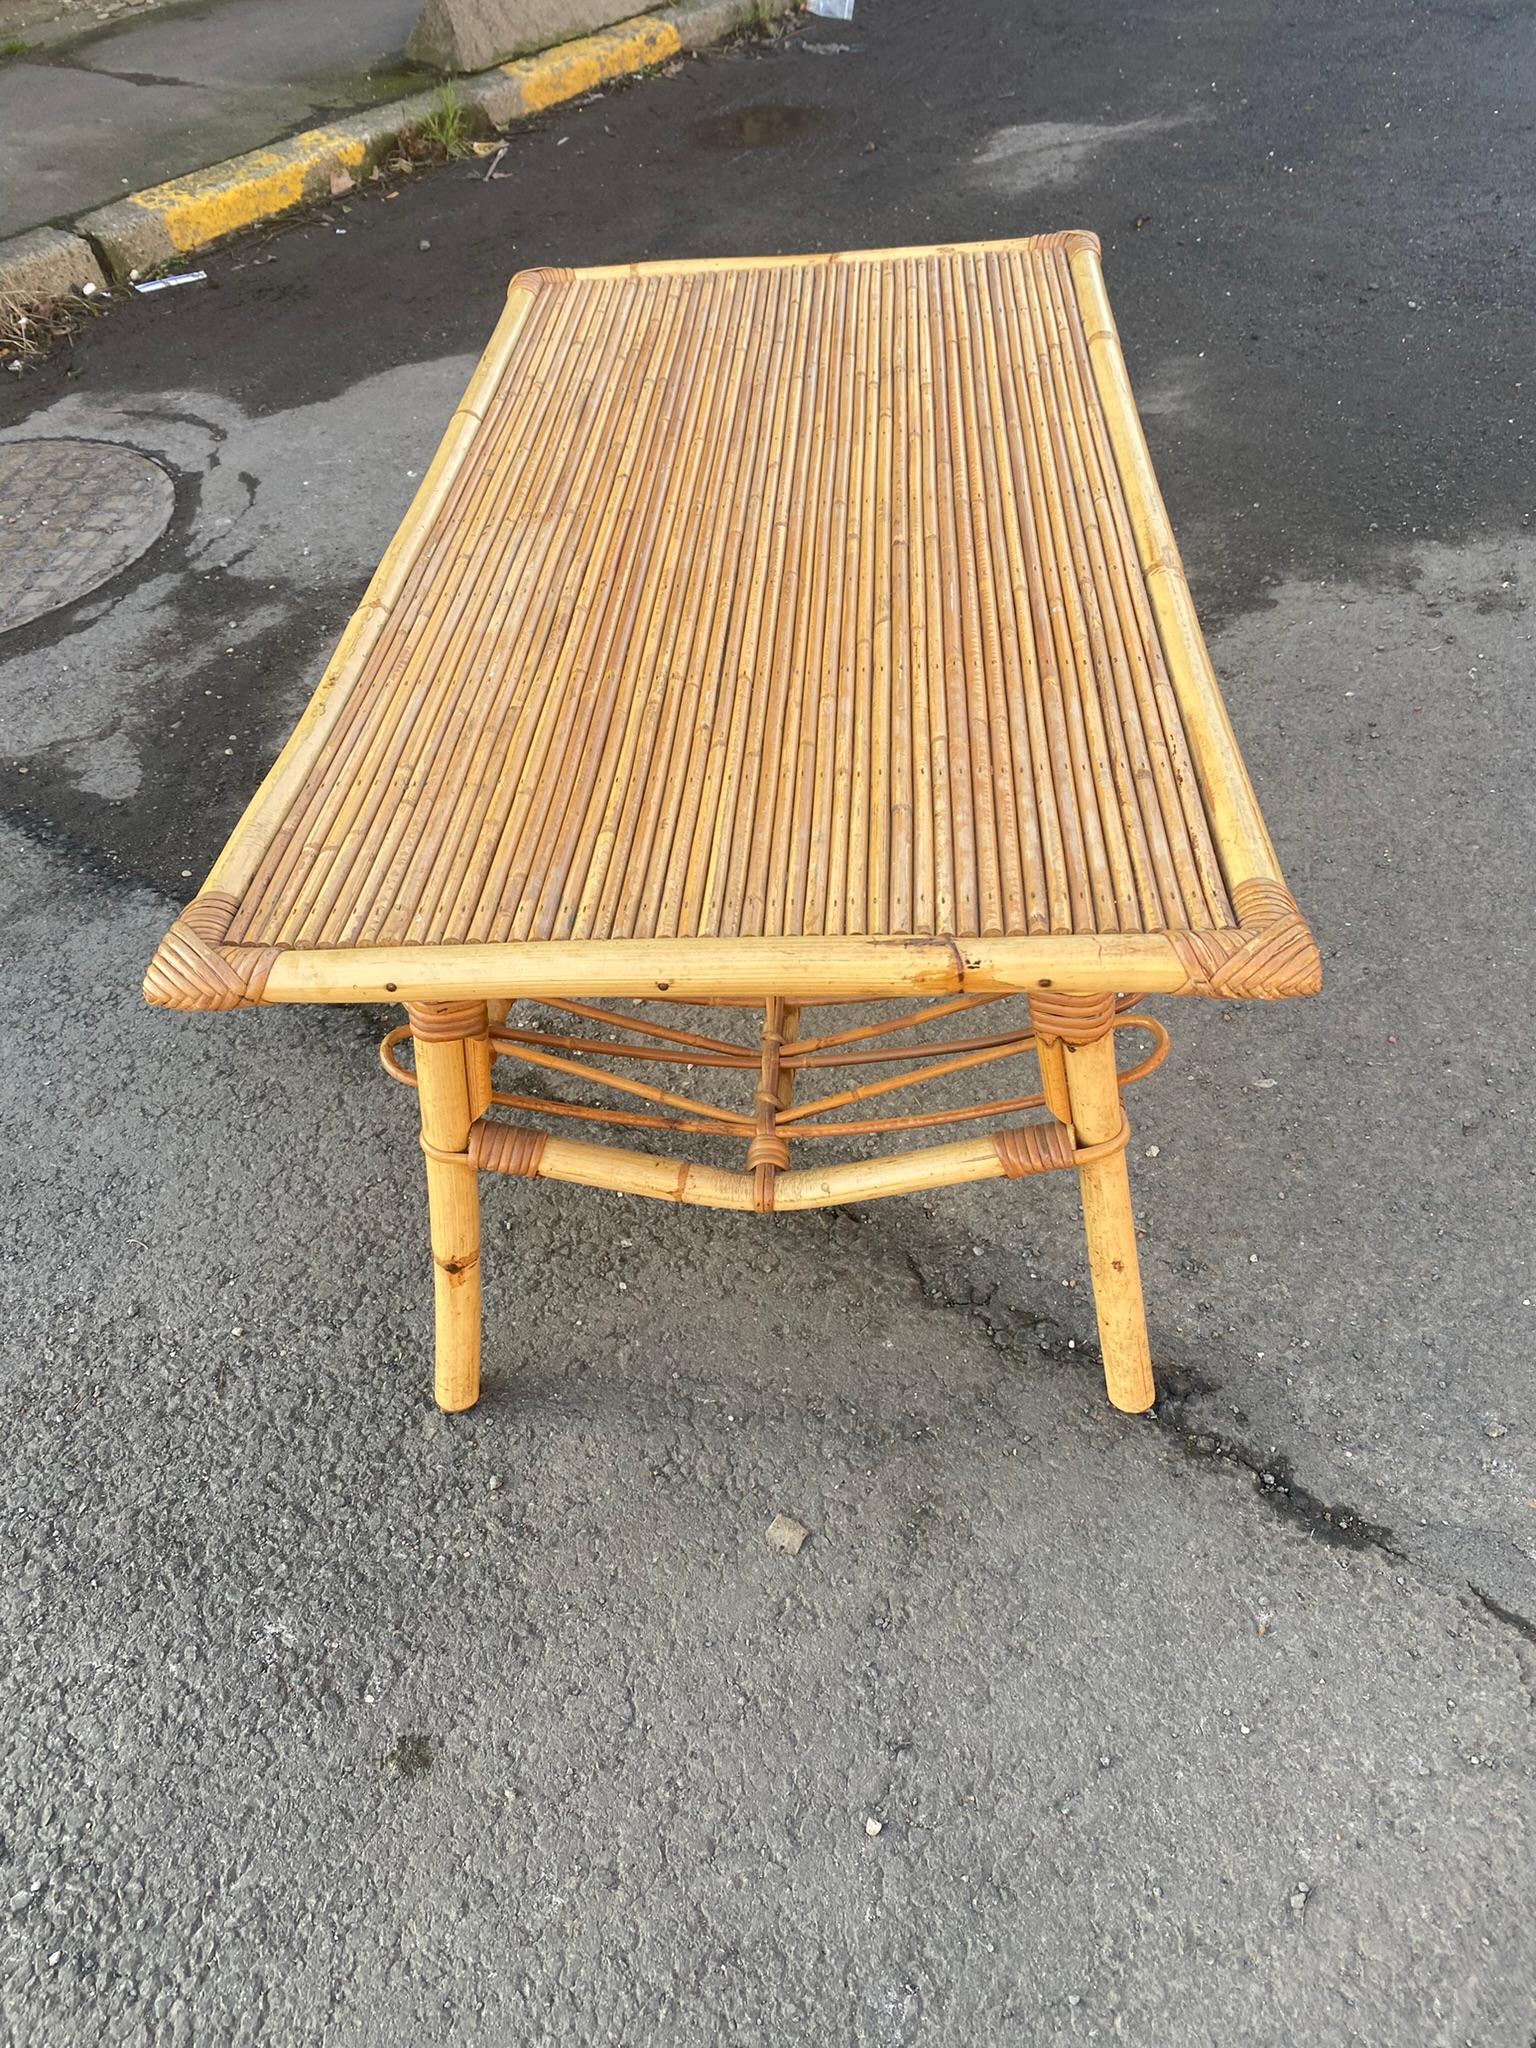 Mid-20th Century Bamboo Table, circa 1960-1970 For Sale